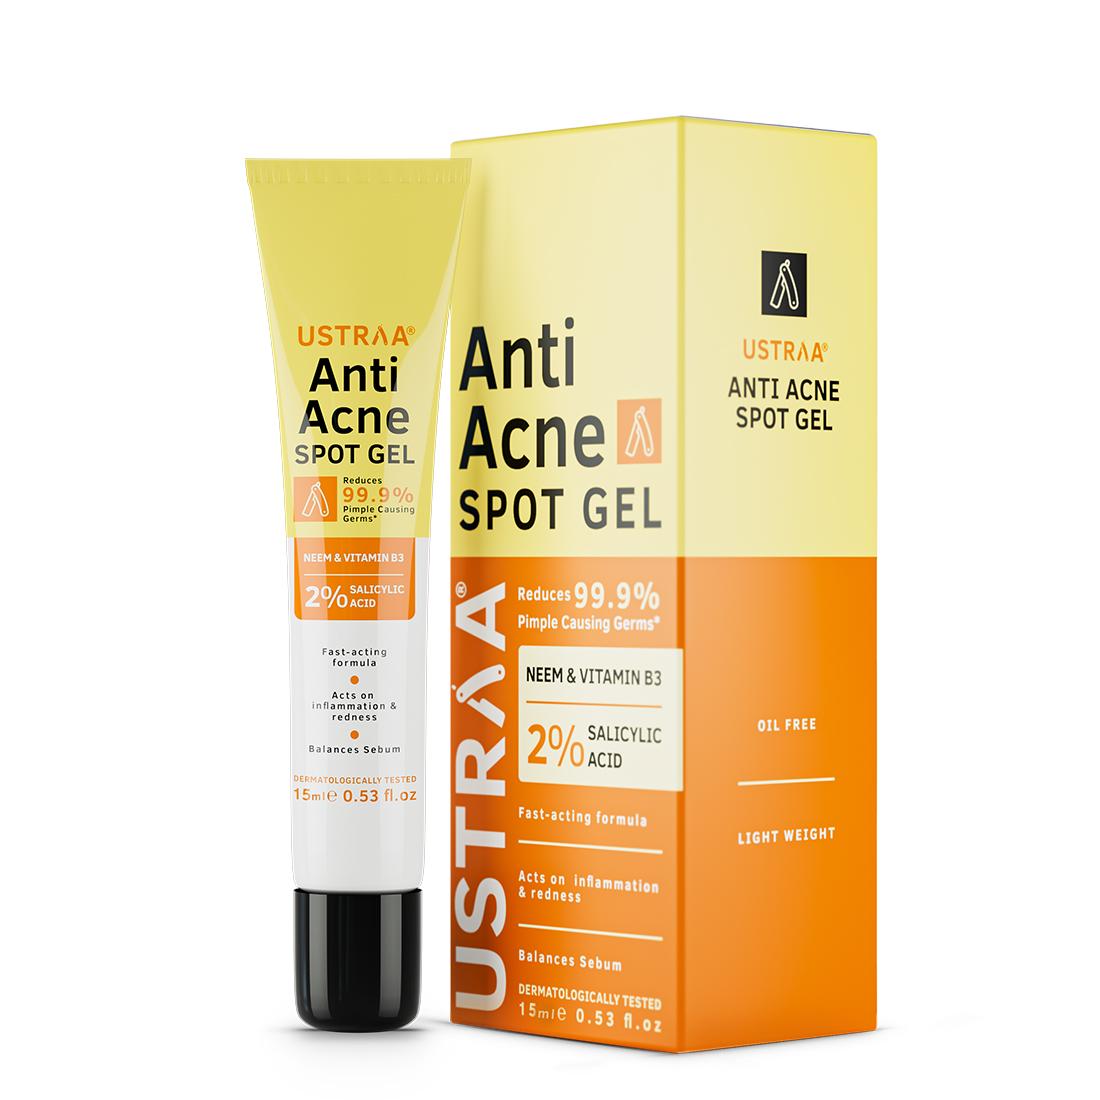 Treats Pimples and Reduces Germs by 99% Oil Free Anti-Acne Spot Gel with  Neem  Vitamin B3 Ustraa